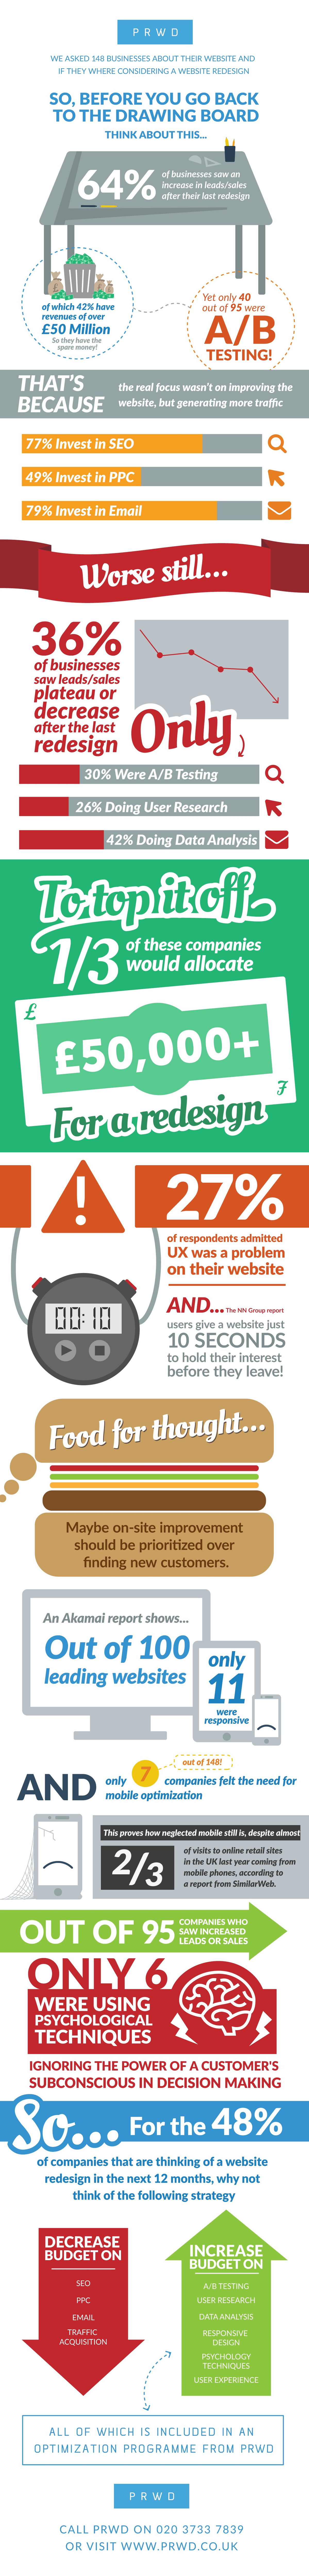 [Infographic] Why-website-redesign-doesnt-always-work